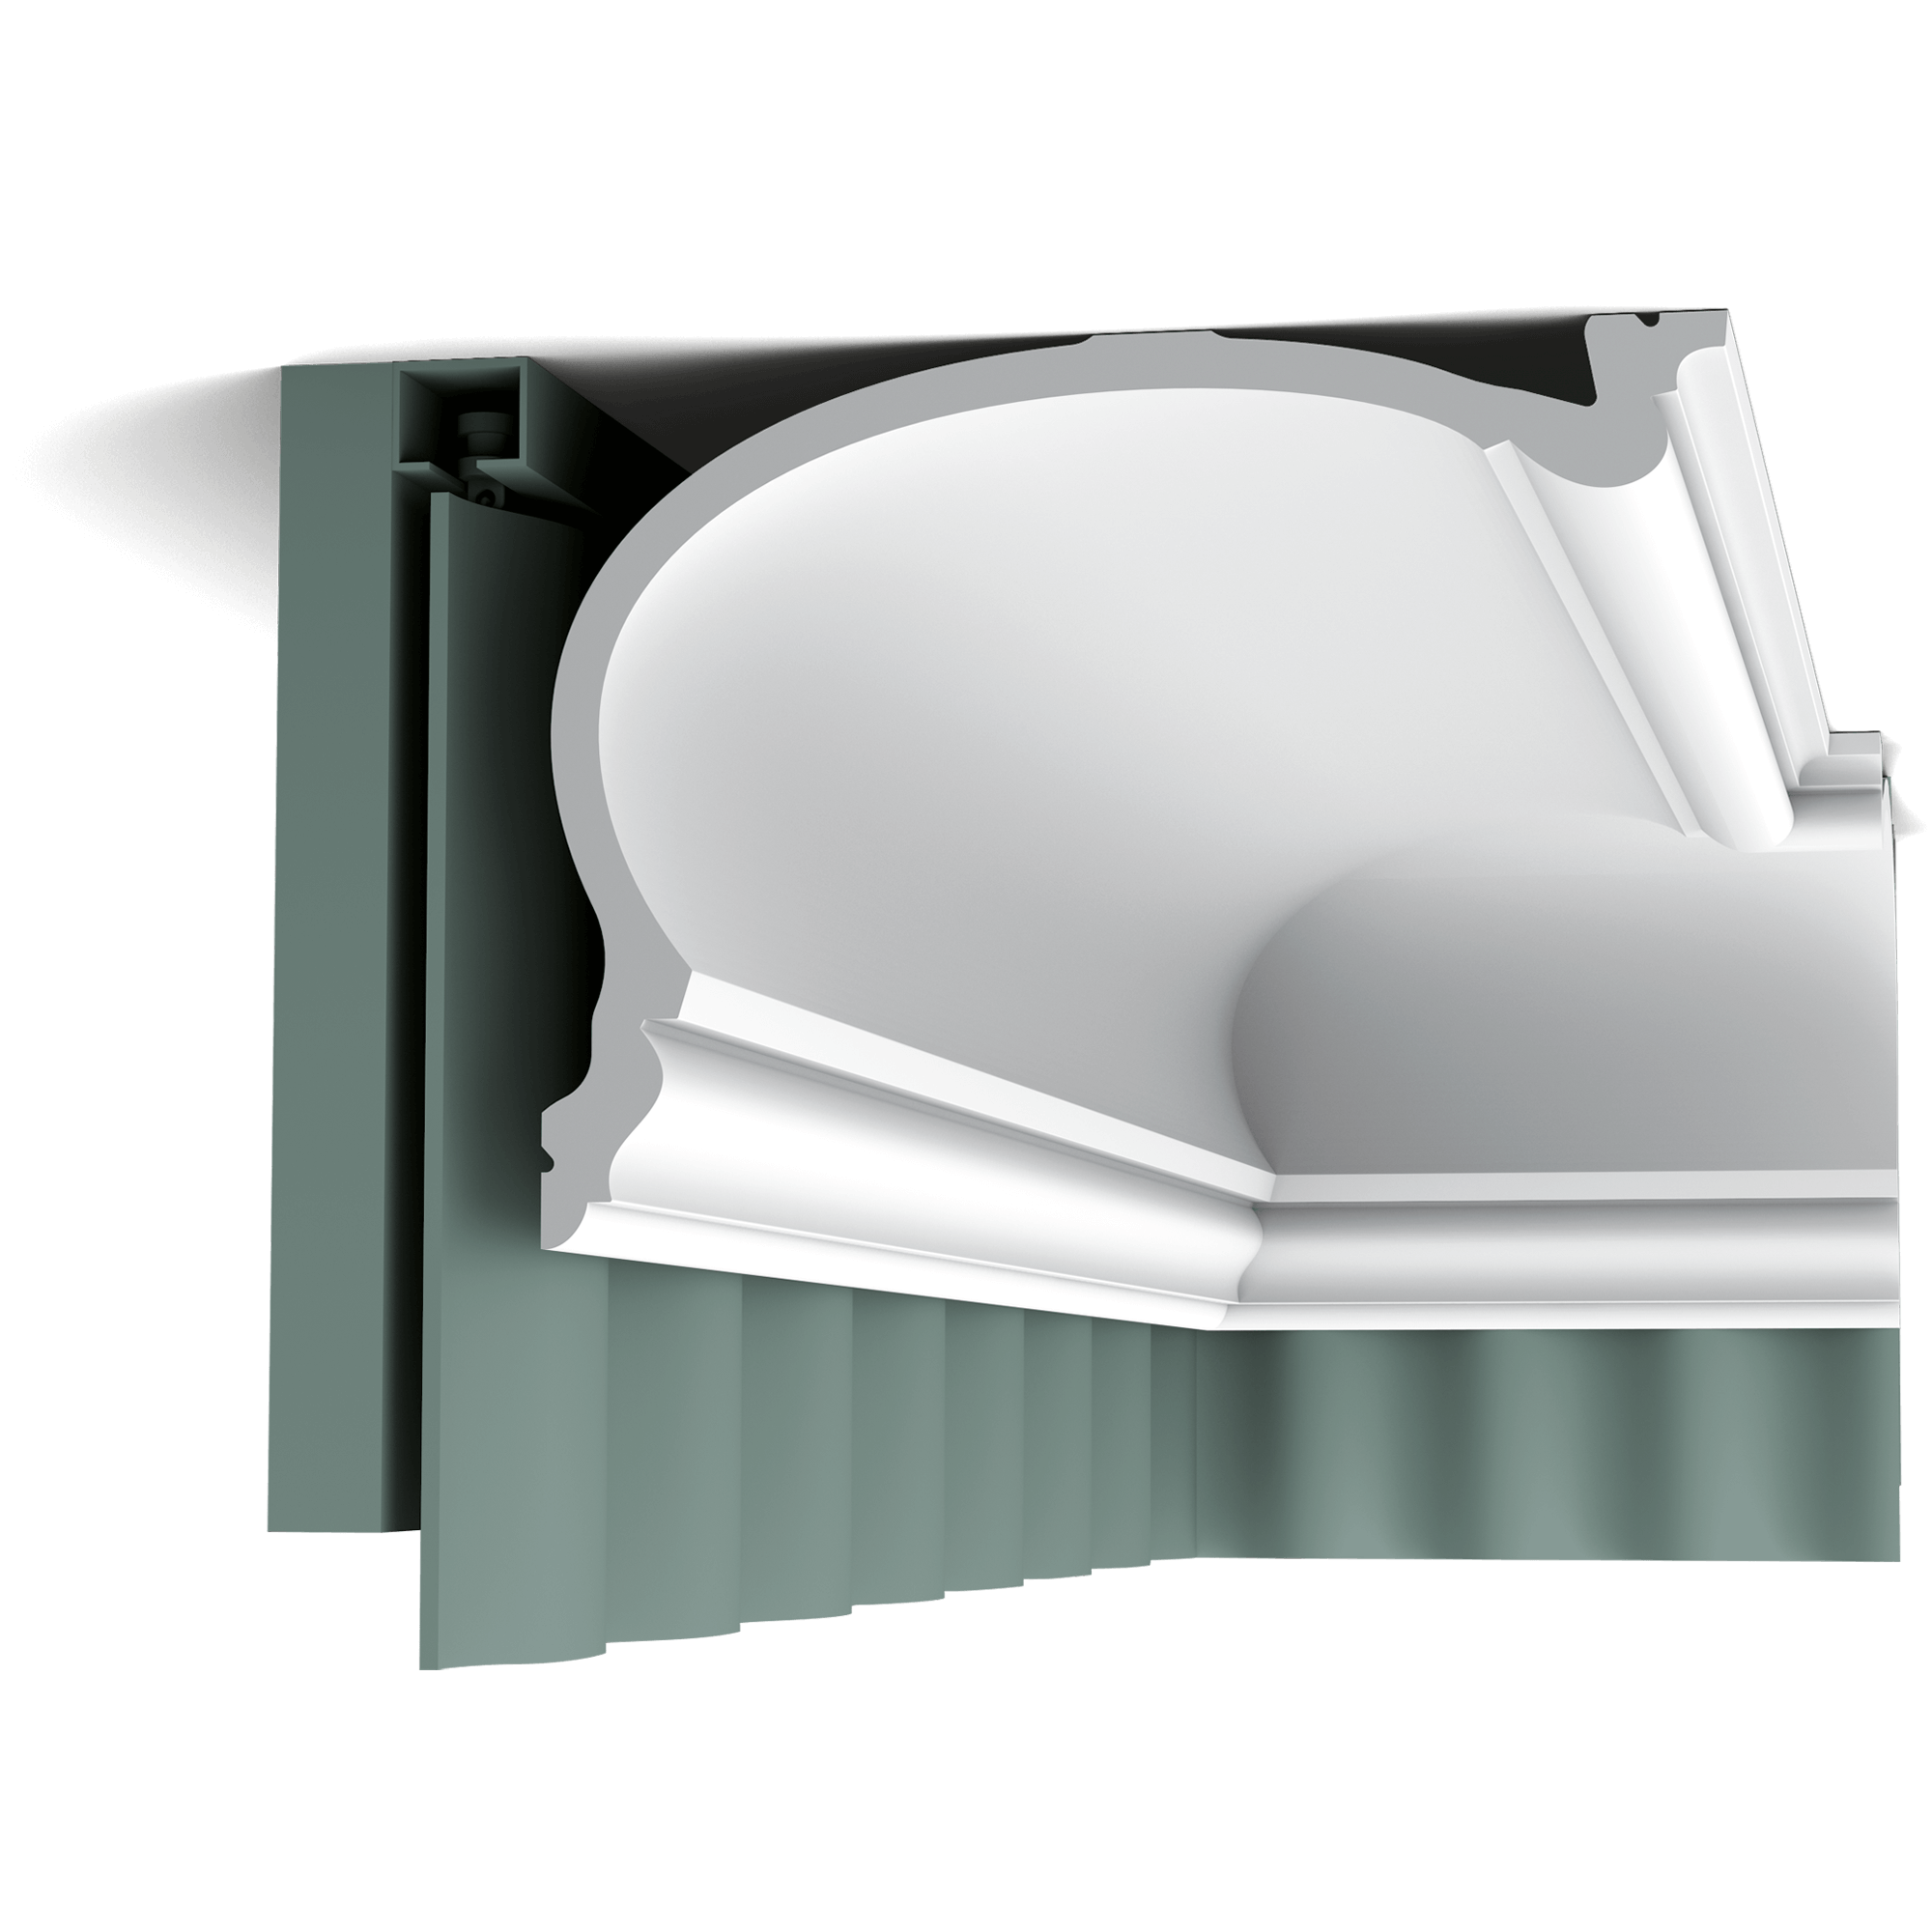 c343 curtain profile 31fd This classic cornice moulding has an additional glueing board so it can also be used as a curtain pelmet. This nicely conceals the curtain fixtures for a neat finish. Installation remark: It is necessary to screw this profile on the wall.